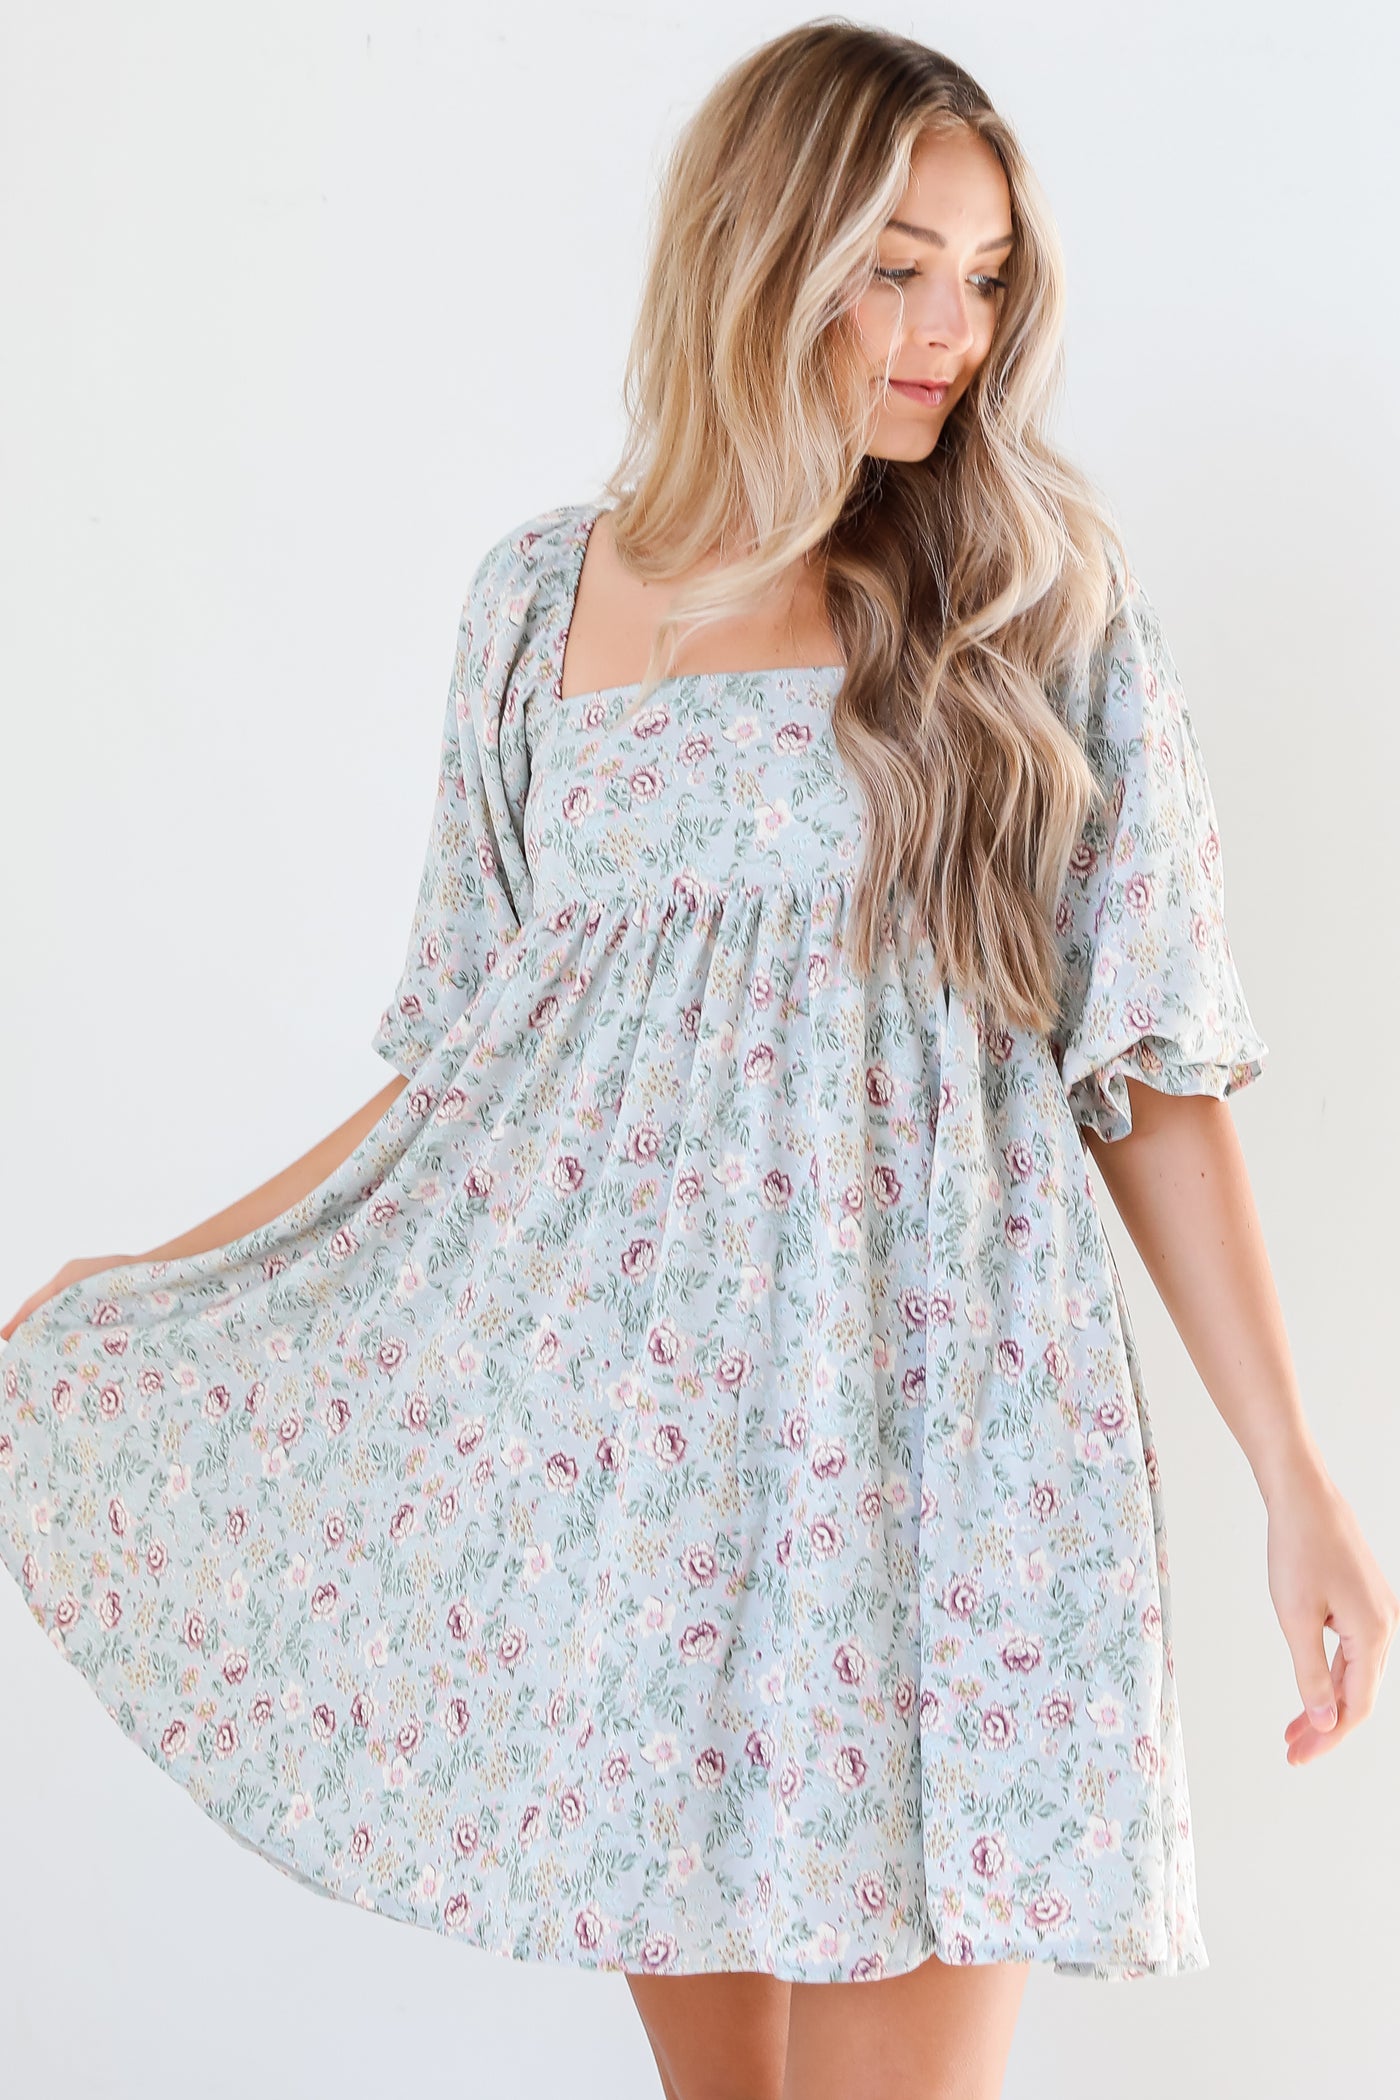 Floral Babydoll Mini Dress front view